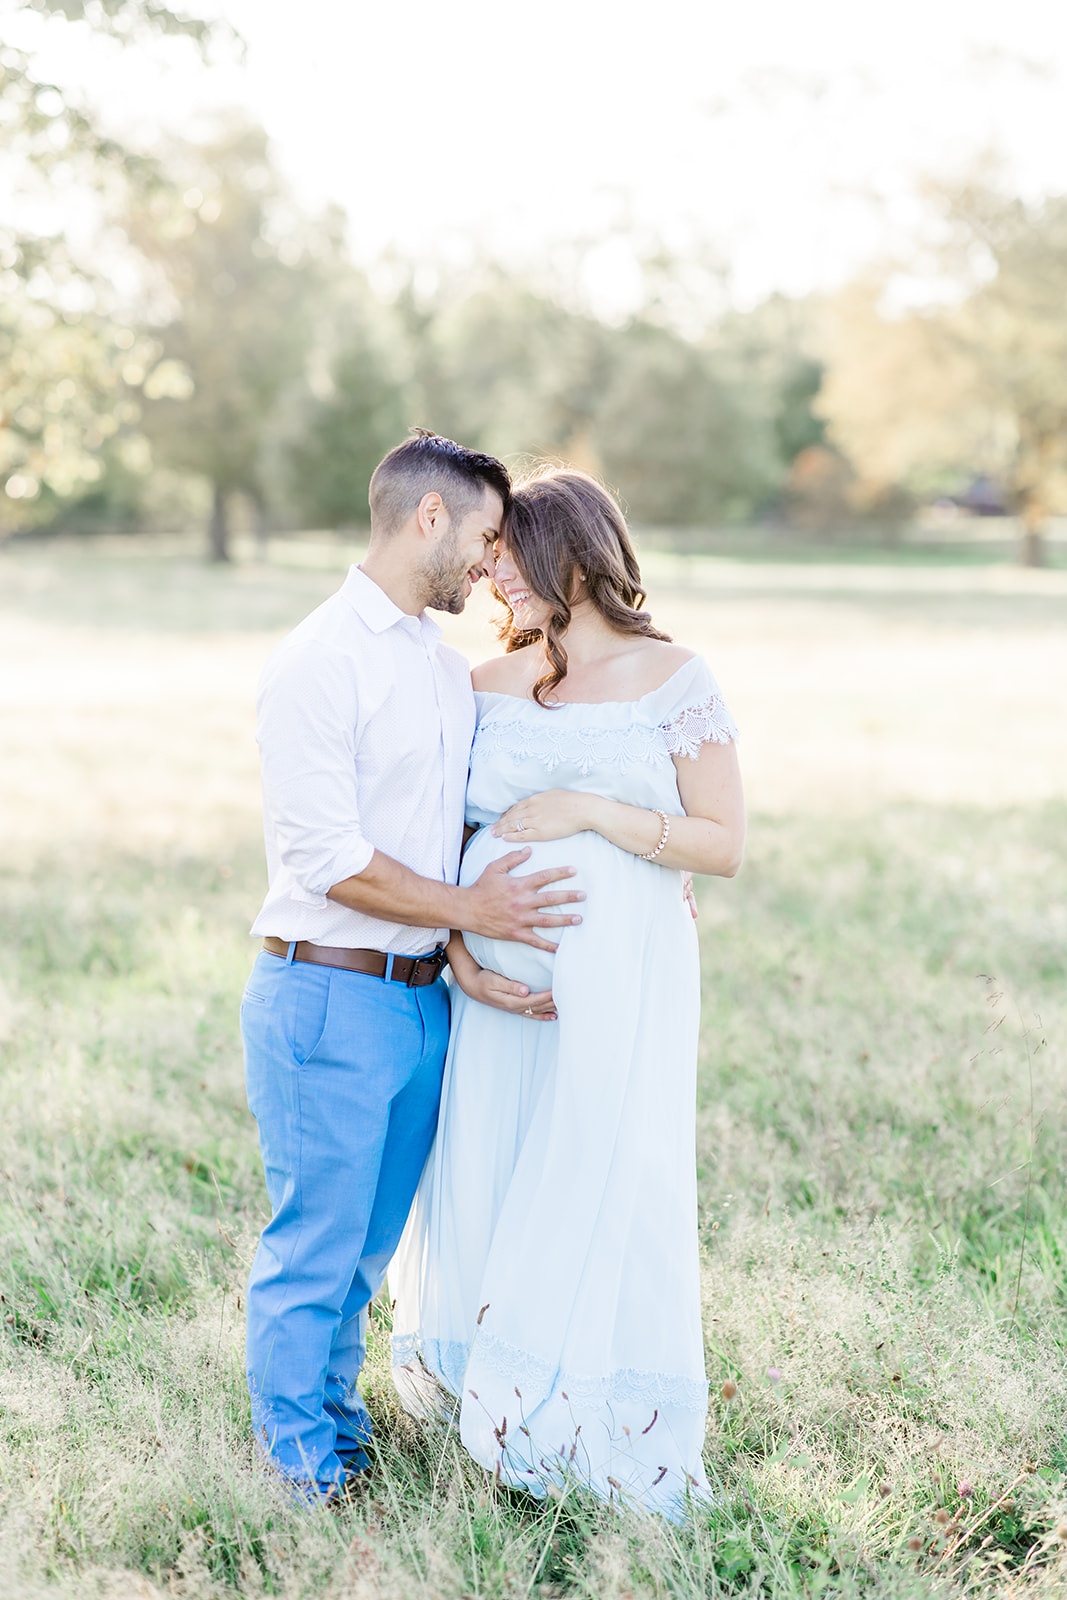 Waveny Park Maternity Session for first-time parents | Kristin Wood Photography